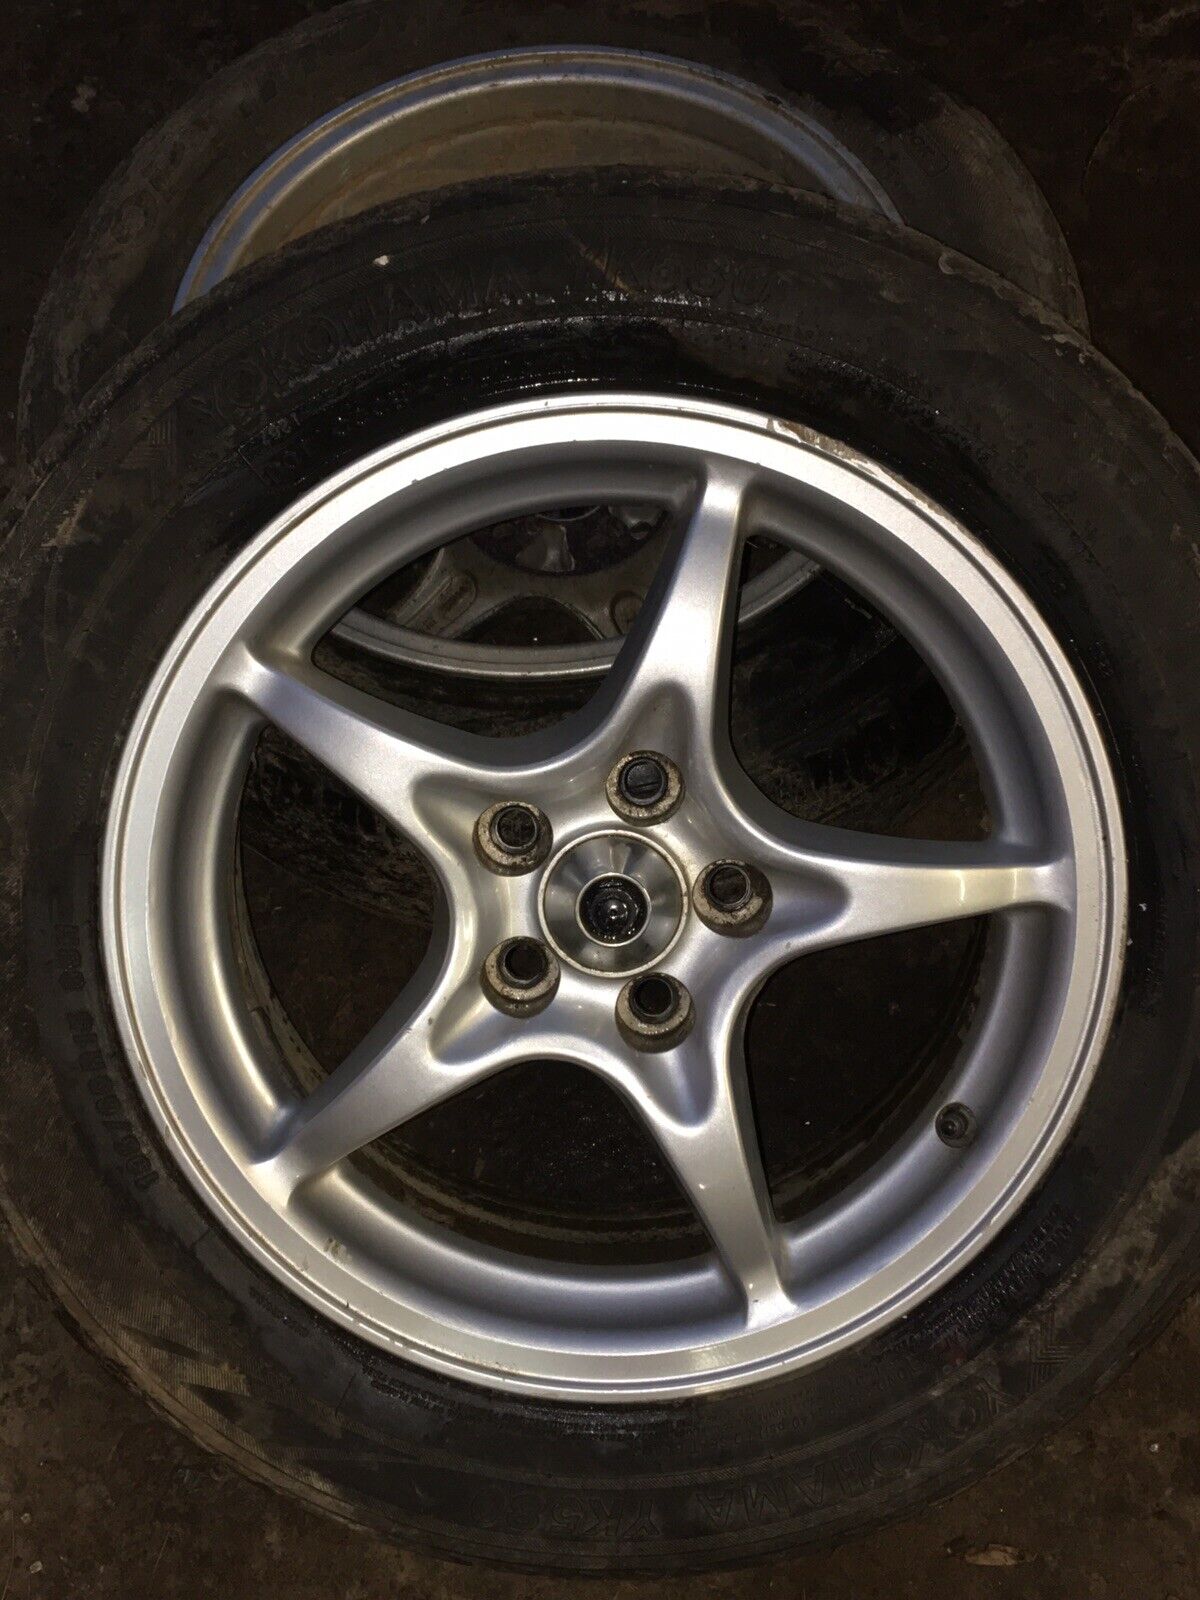 2000-2005 Toyota Celica OEM 15 inch wheel (will not come with tire)